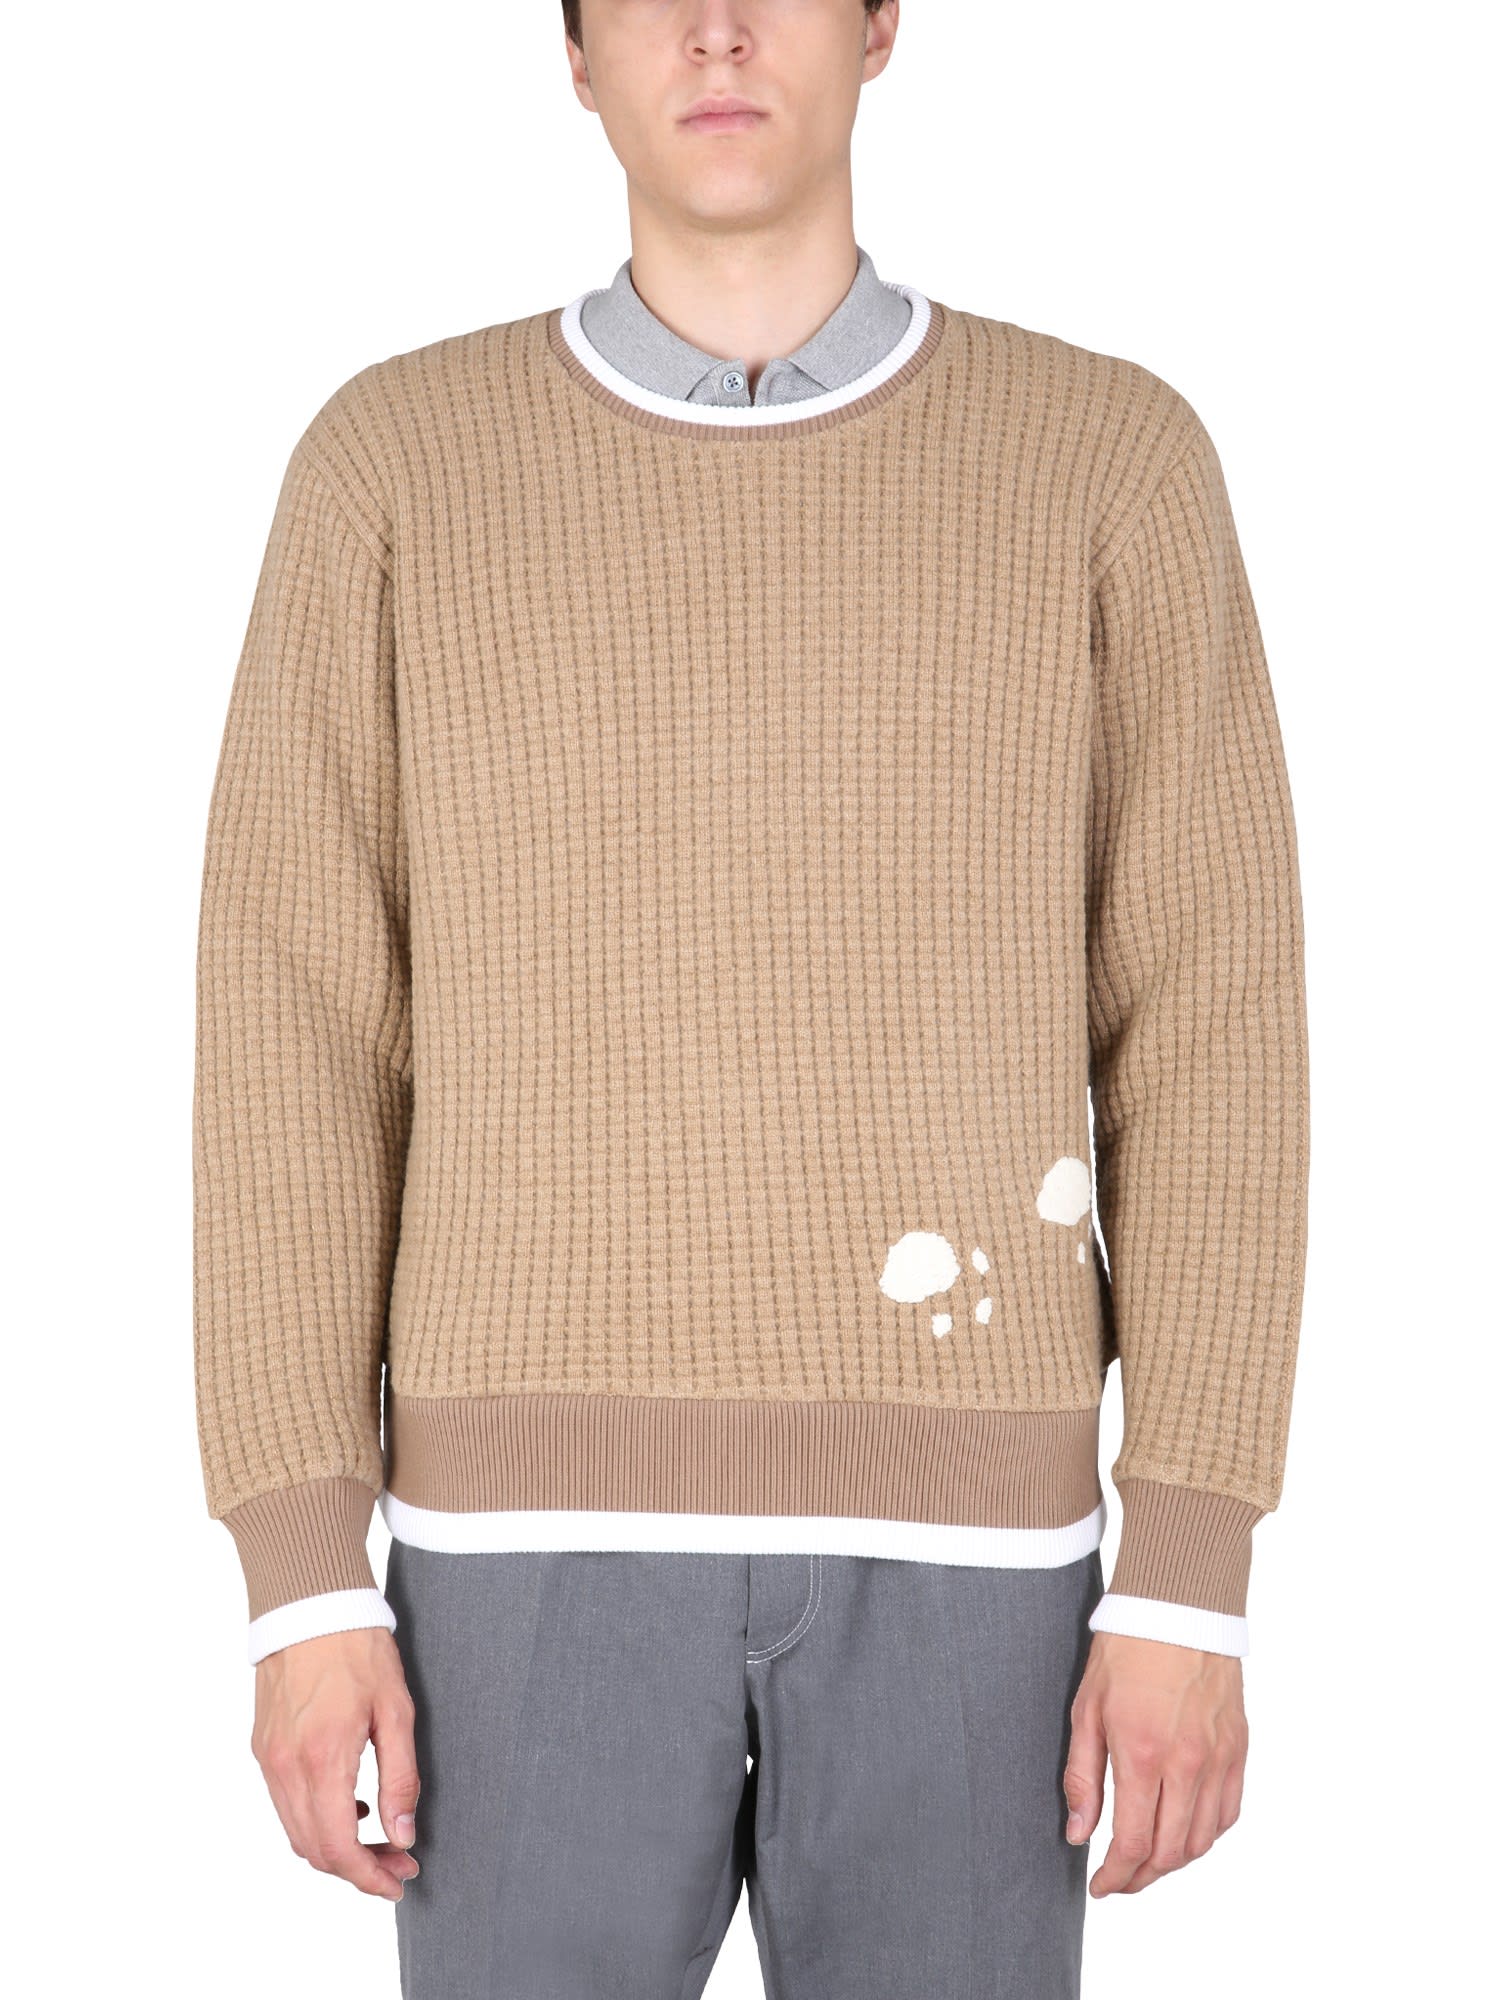 Thom Browne Sweatshirt With Embroidered Bear